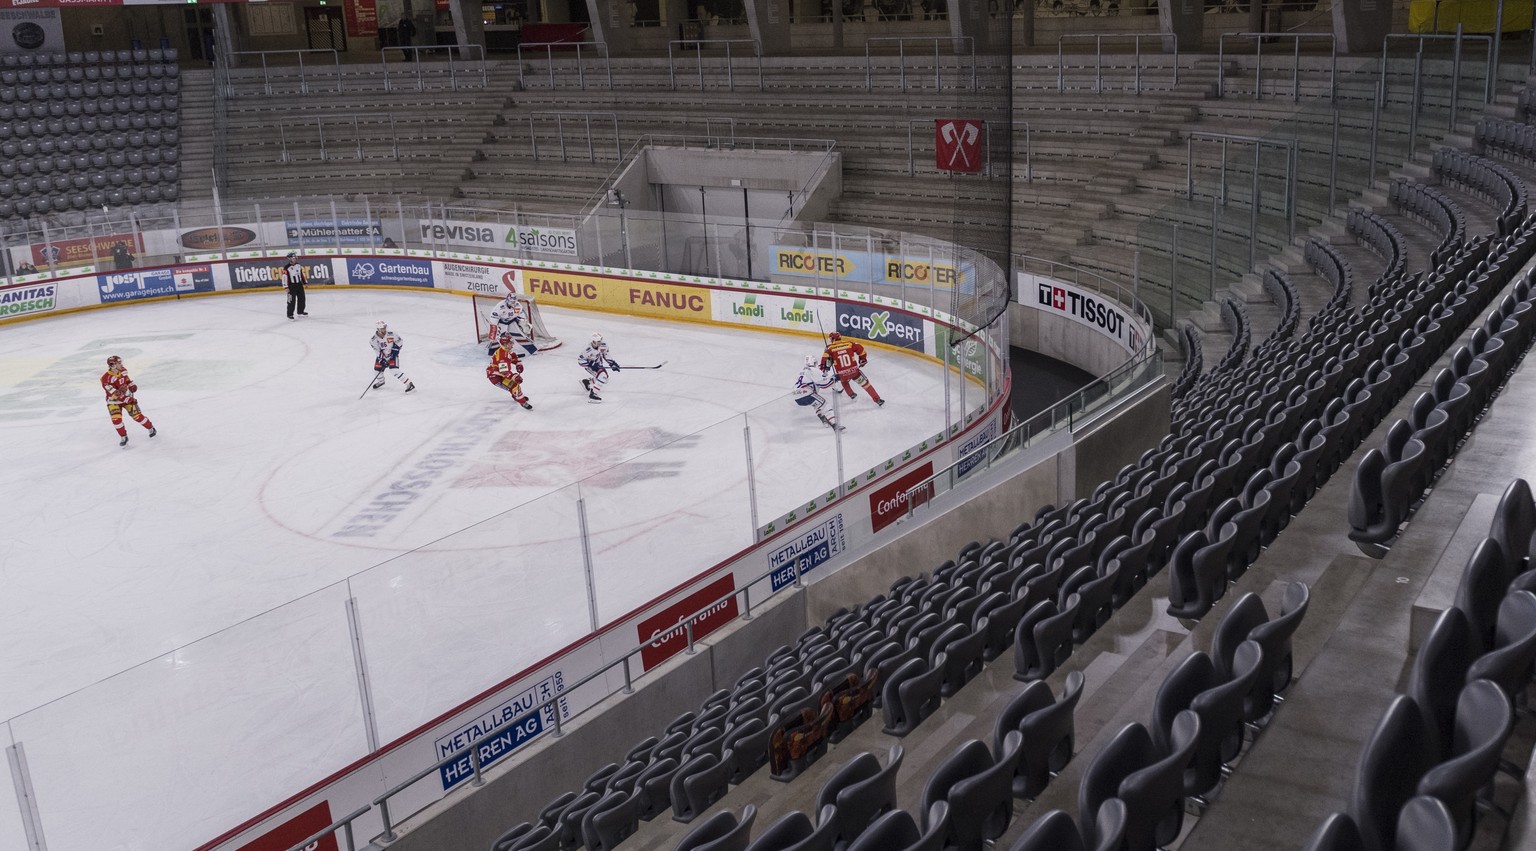 An eerie atmosphere in the almost empty stadium during the Swiss National League ice hockey match between EHC Bieland ZSC Lions, Friday, February 28, 2020 in the Tissot Arena in Biel, Switzerland. As  ...